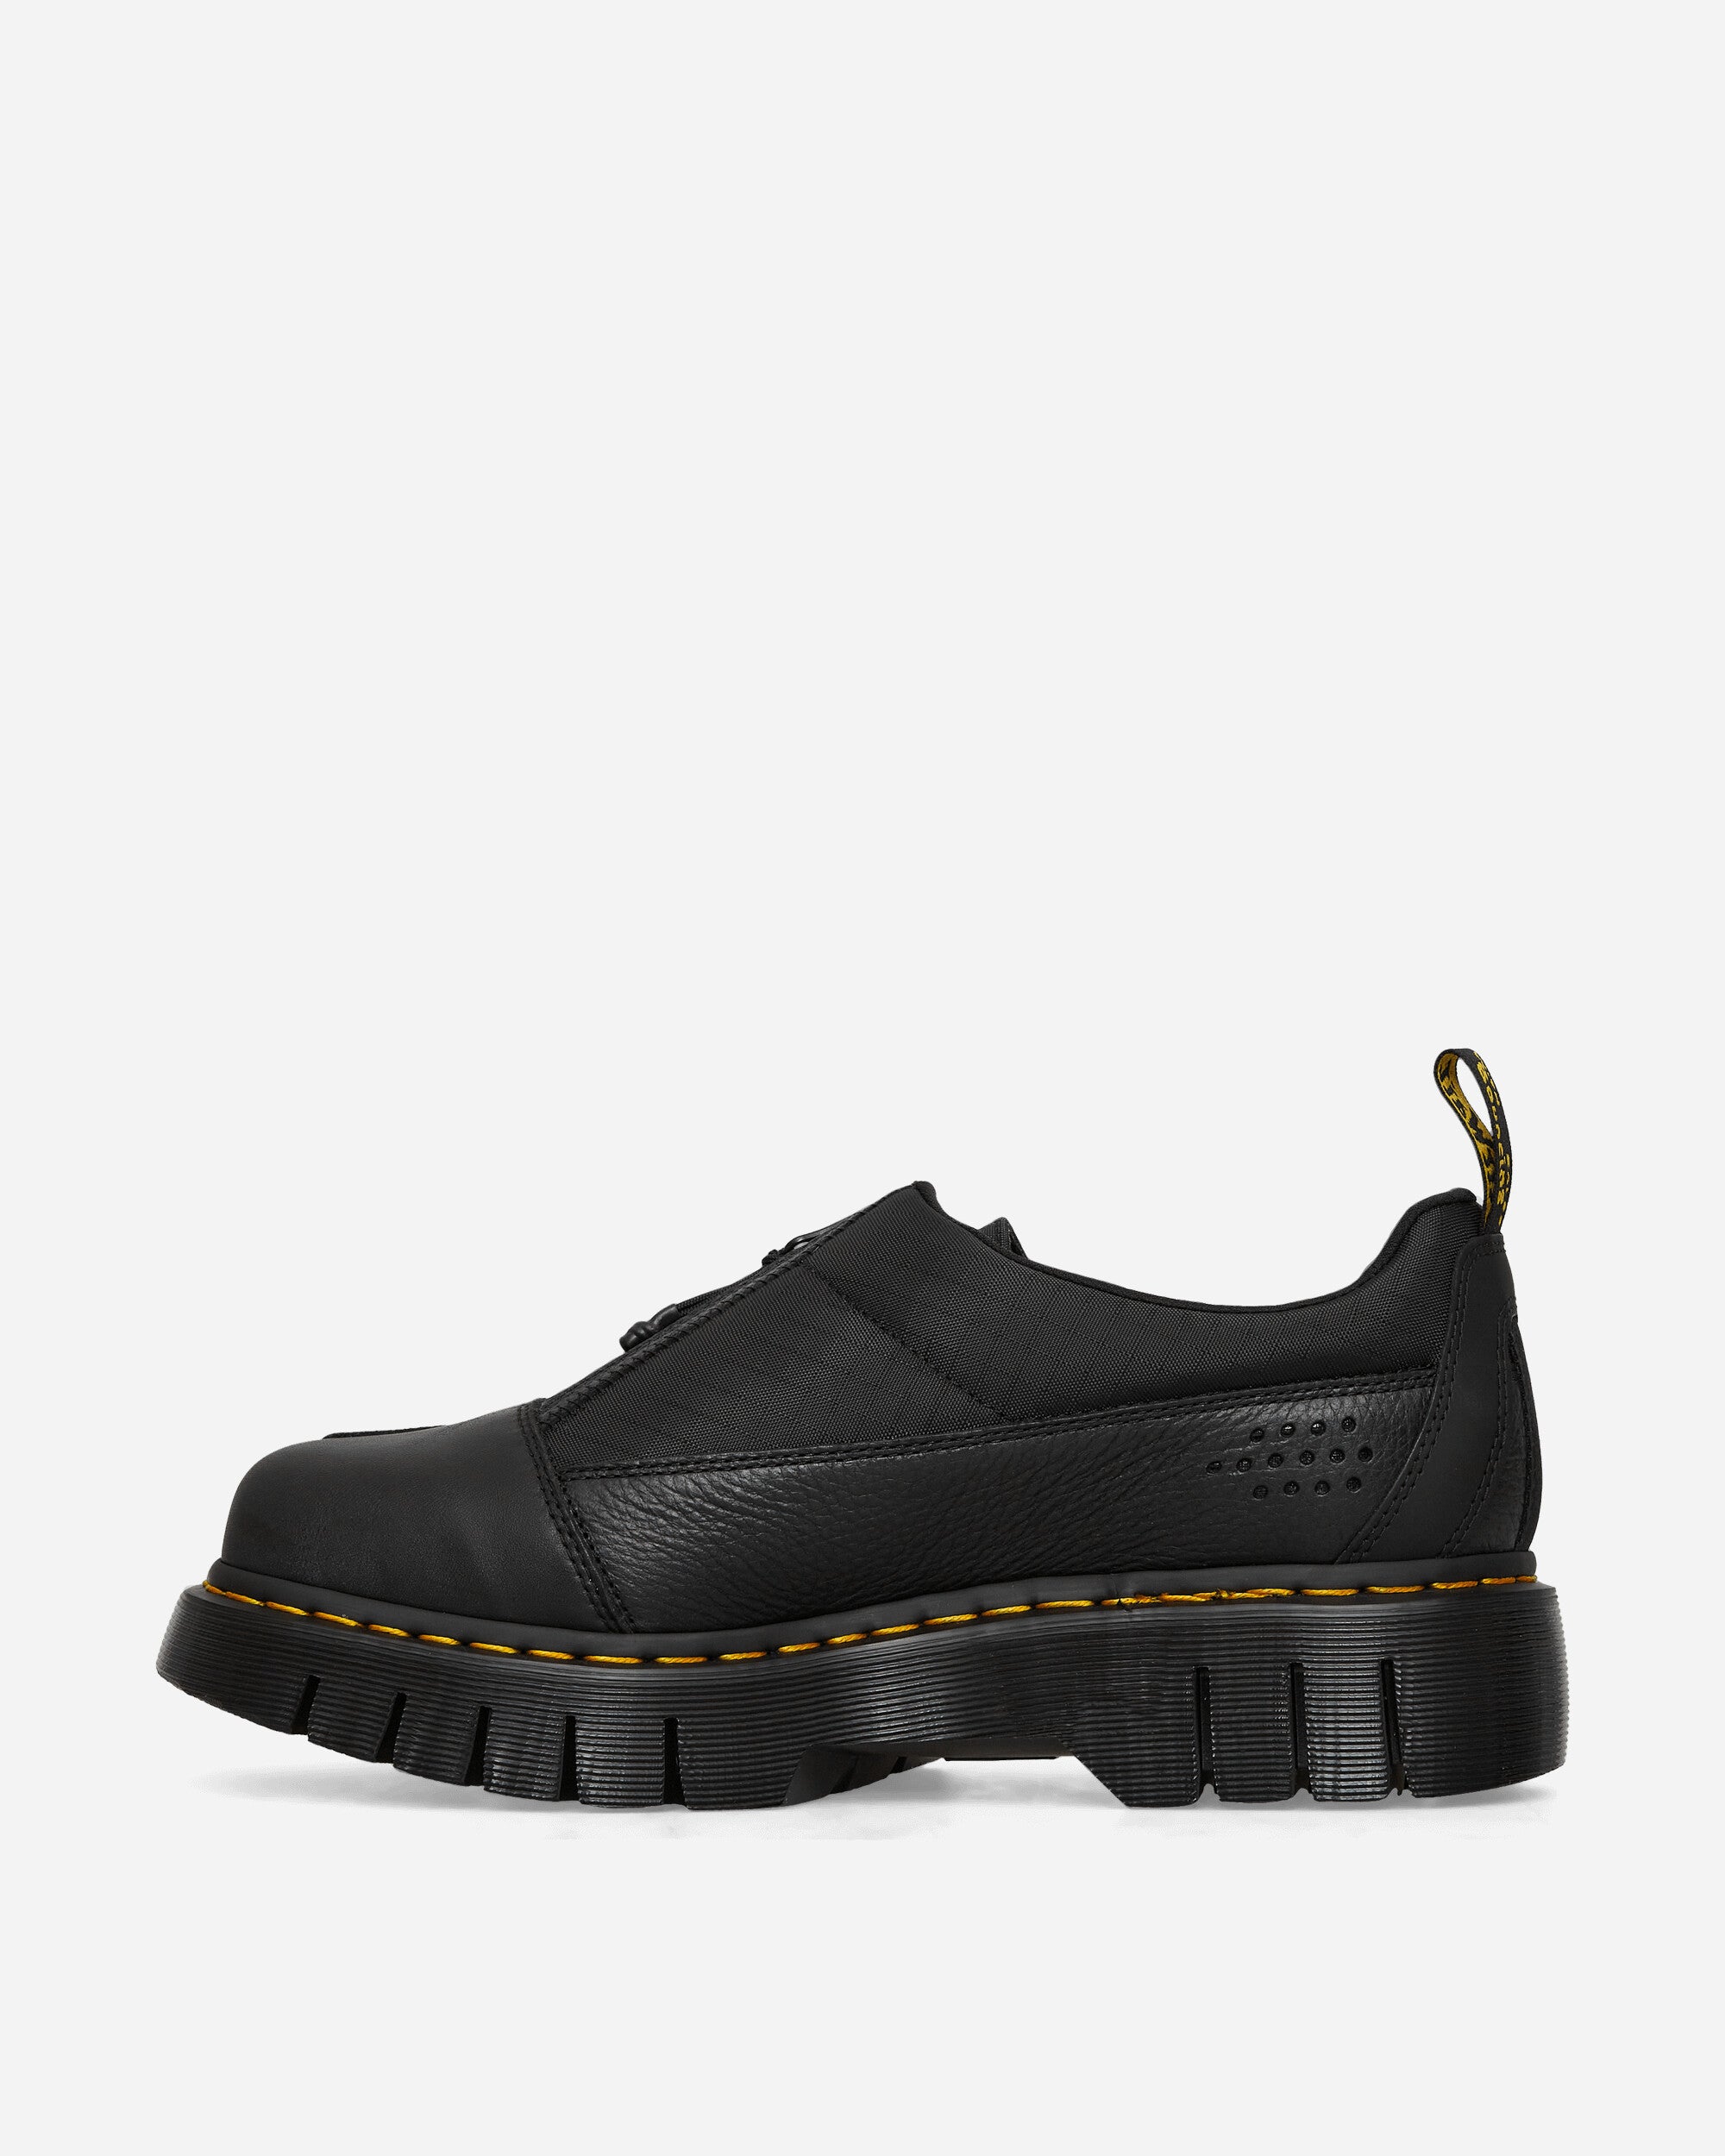 Dr. Martens 1461 Beta Clubwedge Black Classic Shoes Laced Up 31796001 001